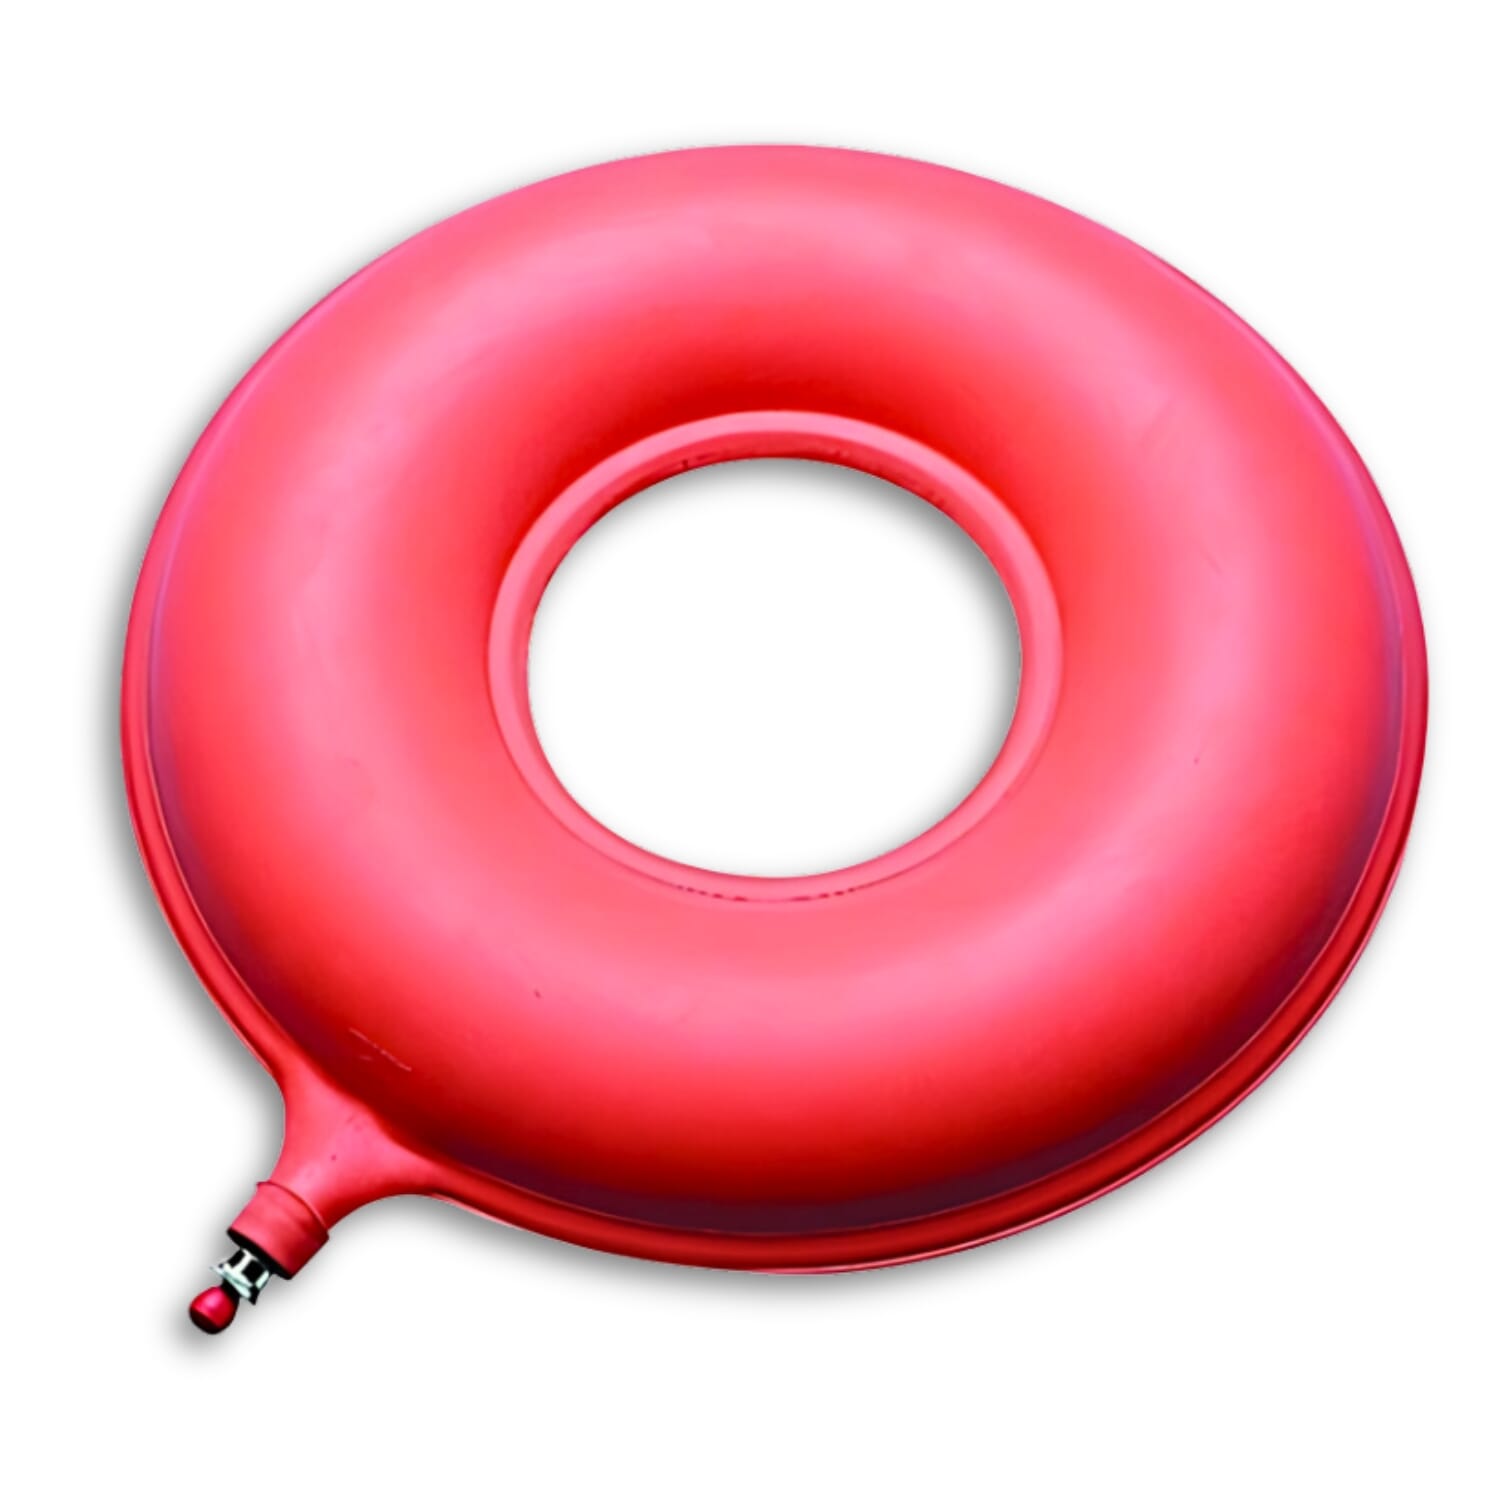 View Inflatable Rubber Ring 18 inches information